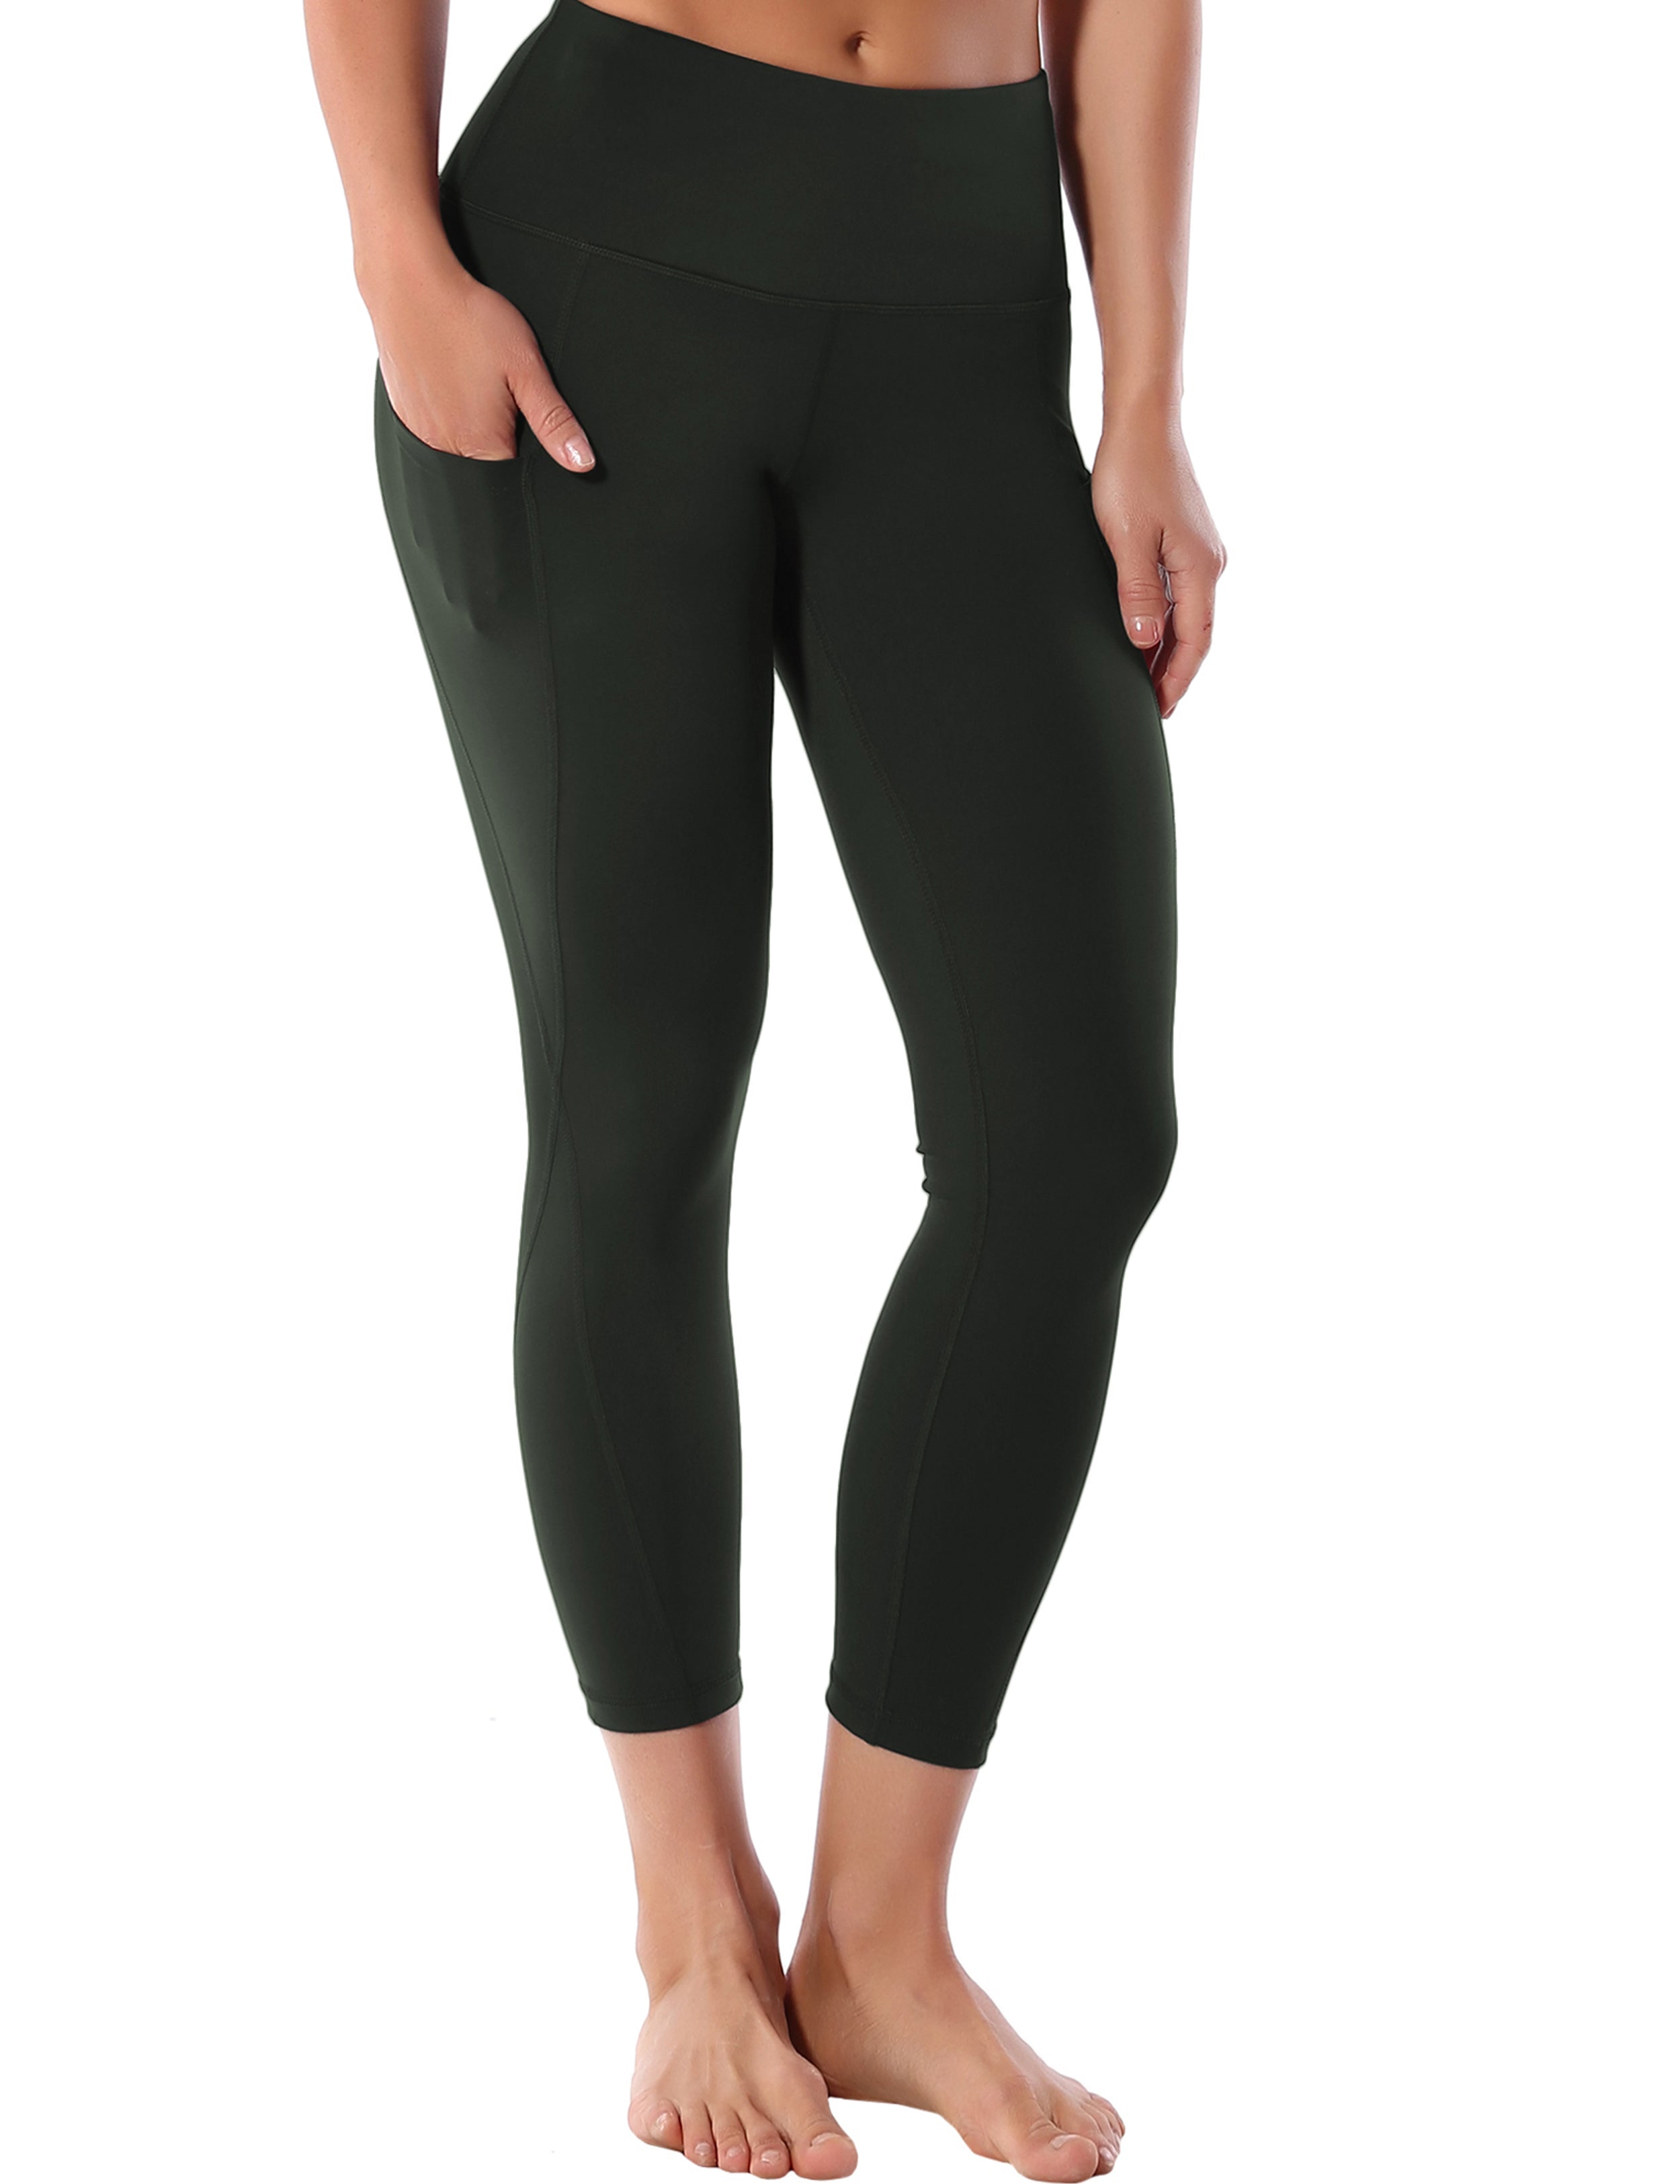 22" High Waist Side Pockets Capris olivegray 75%Nylon/25%Spandex Fabric doesn't attract lint easily 4-way stretch No see-through Moisture-wicking Tummy control Inner pocket